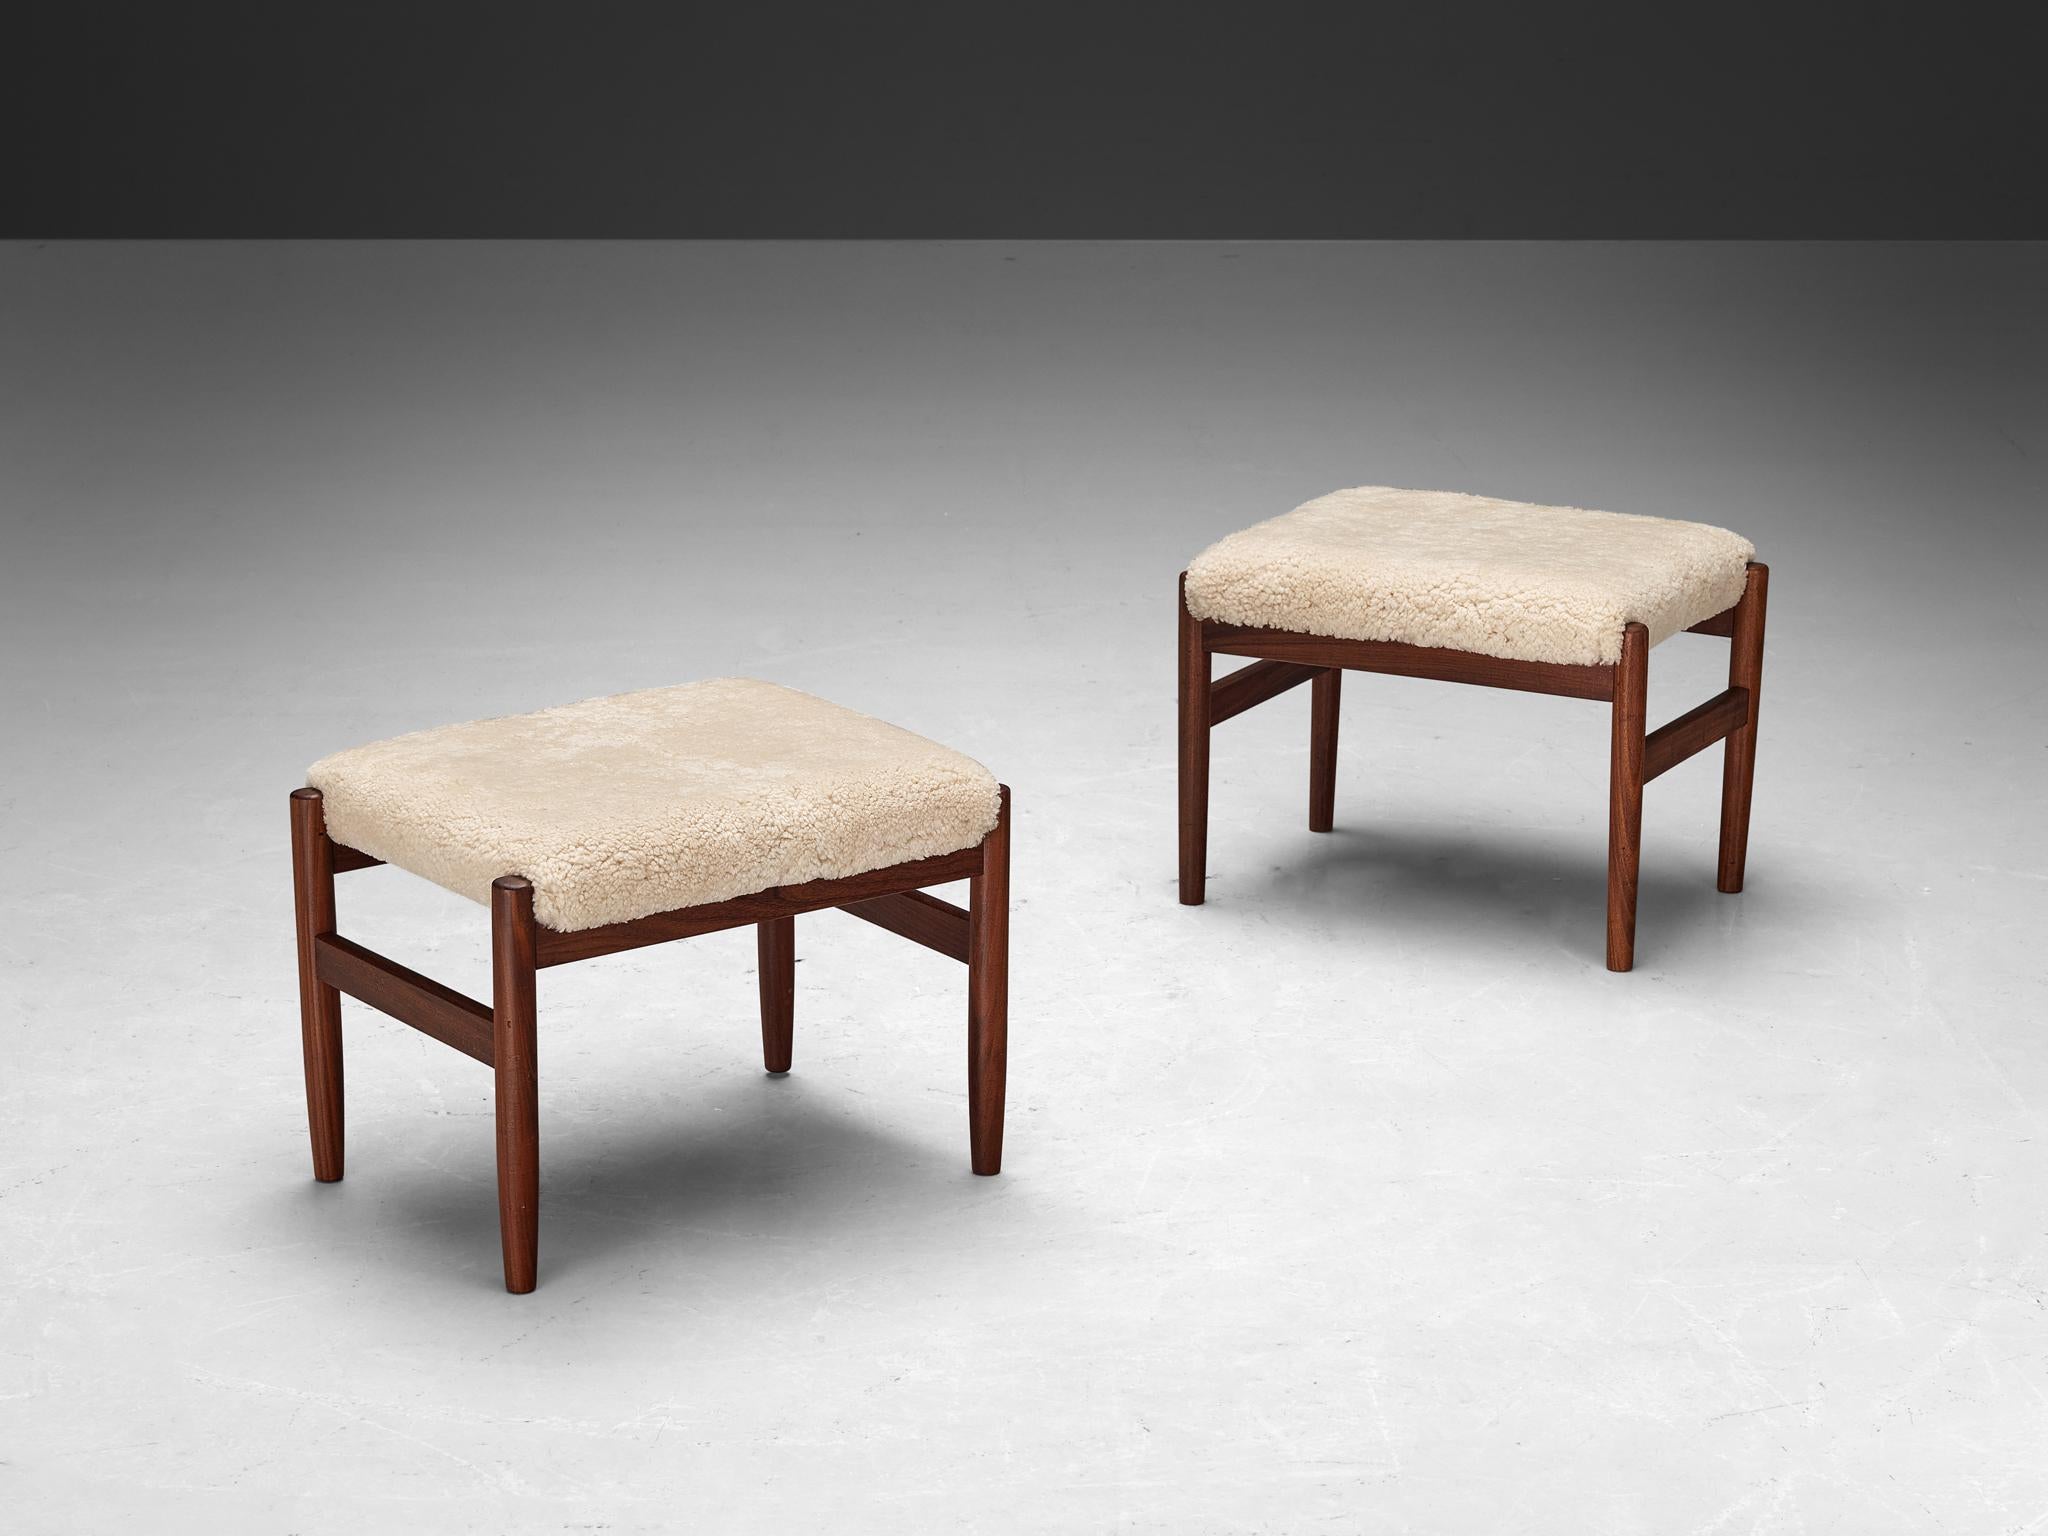 Ottomans or stools, Scandinavia, teak, shearling upholstery, 1960s

Exhibiting a timeless blend of simplicity and functionality, these stools epitomize the understated elegance characteristic of Mid-Century Scandinavian design. Crafted from teak,